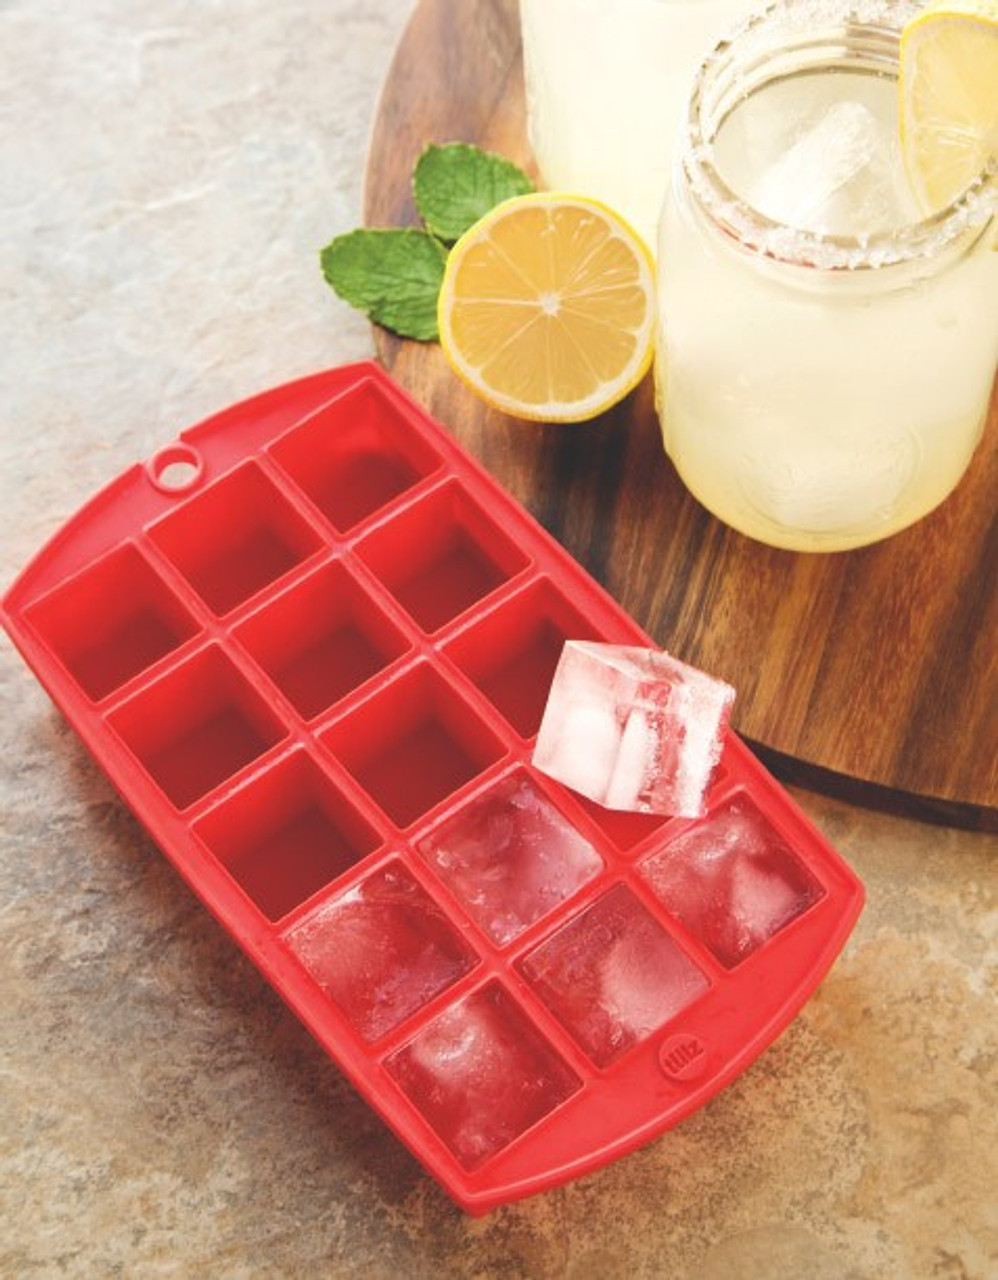 https://cdn11.bigcommerce.com/s-ympg1dfqkh/images/stencil/1280x1280/products/4899/34744/Silicone-Ice-Block-Tray-Mini__41648.1586637088.jpg?c=2